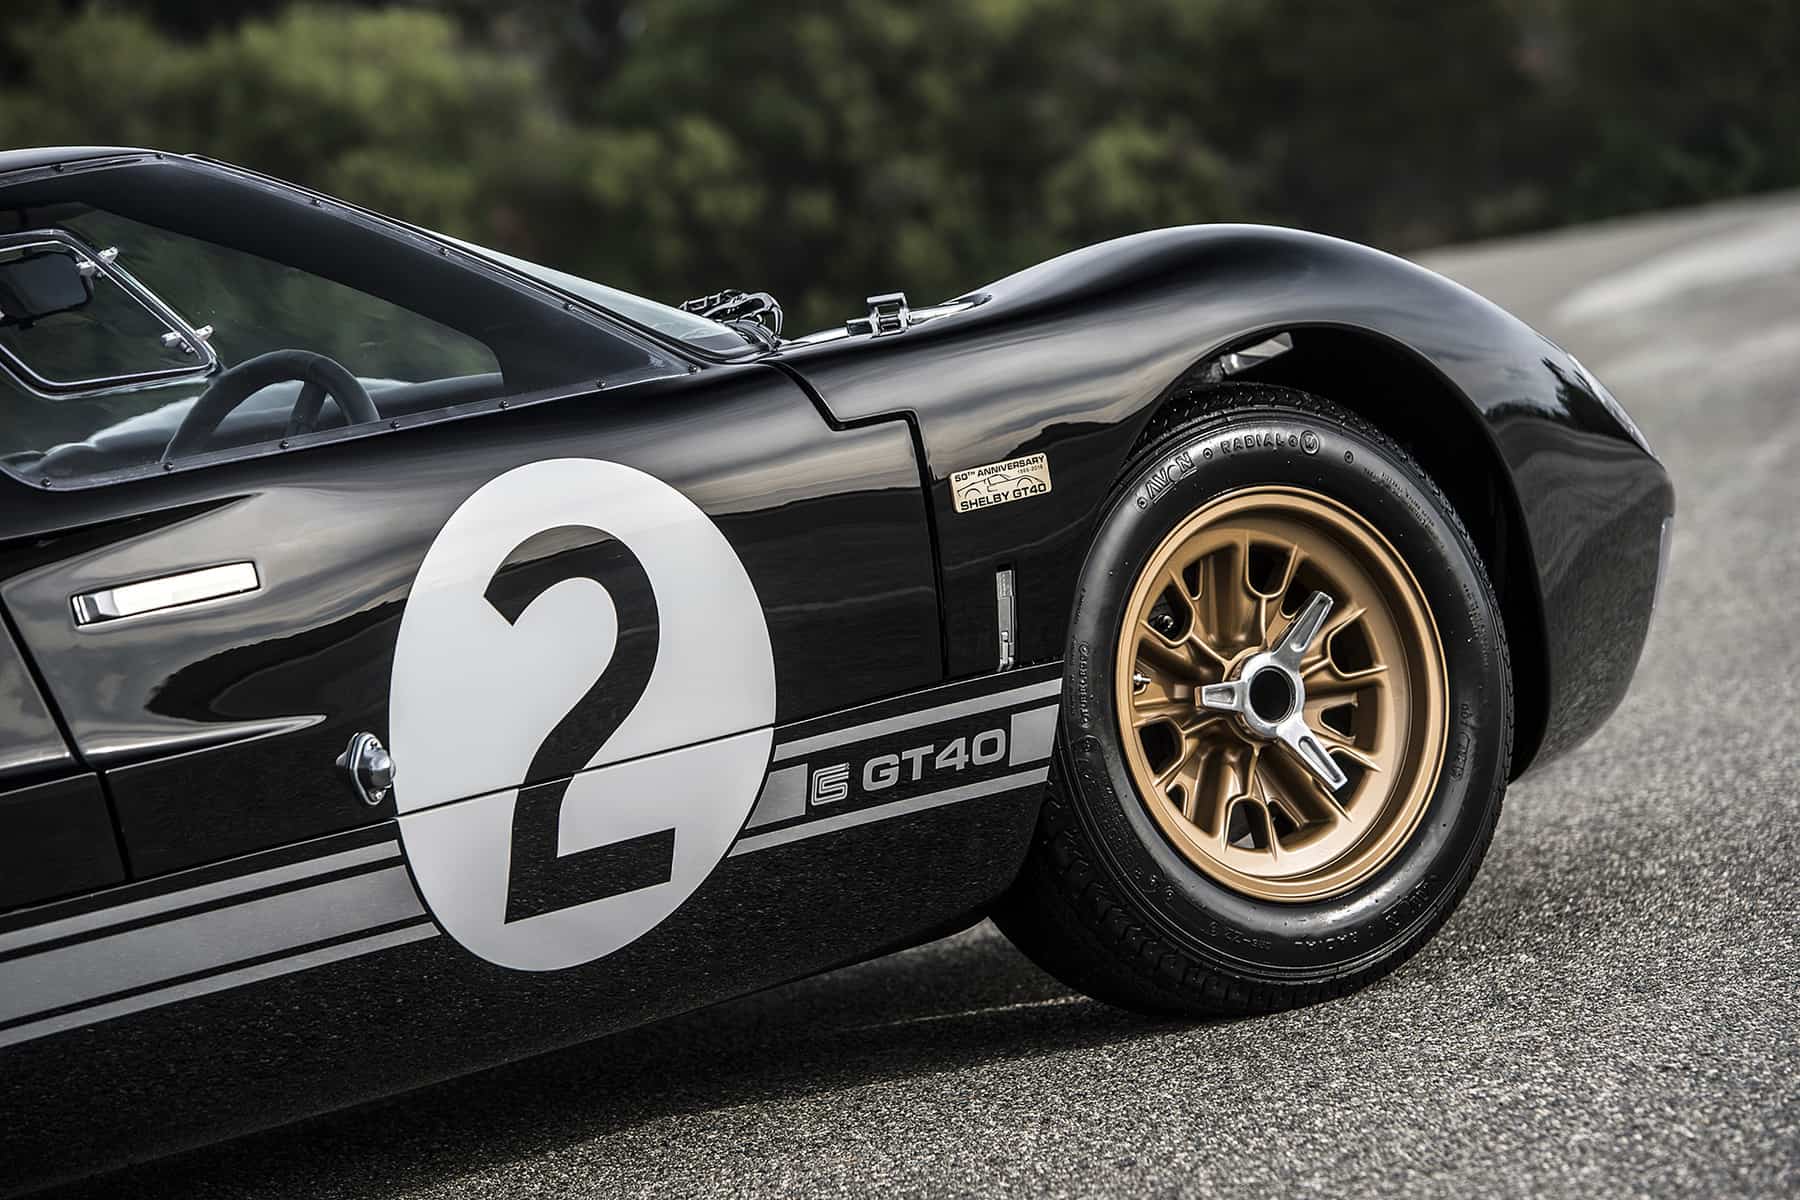 Ford-GT40-MKII-50th-Anniversary-Edition-20